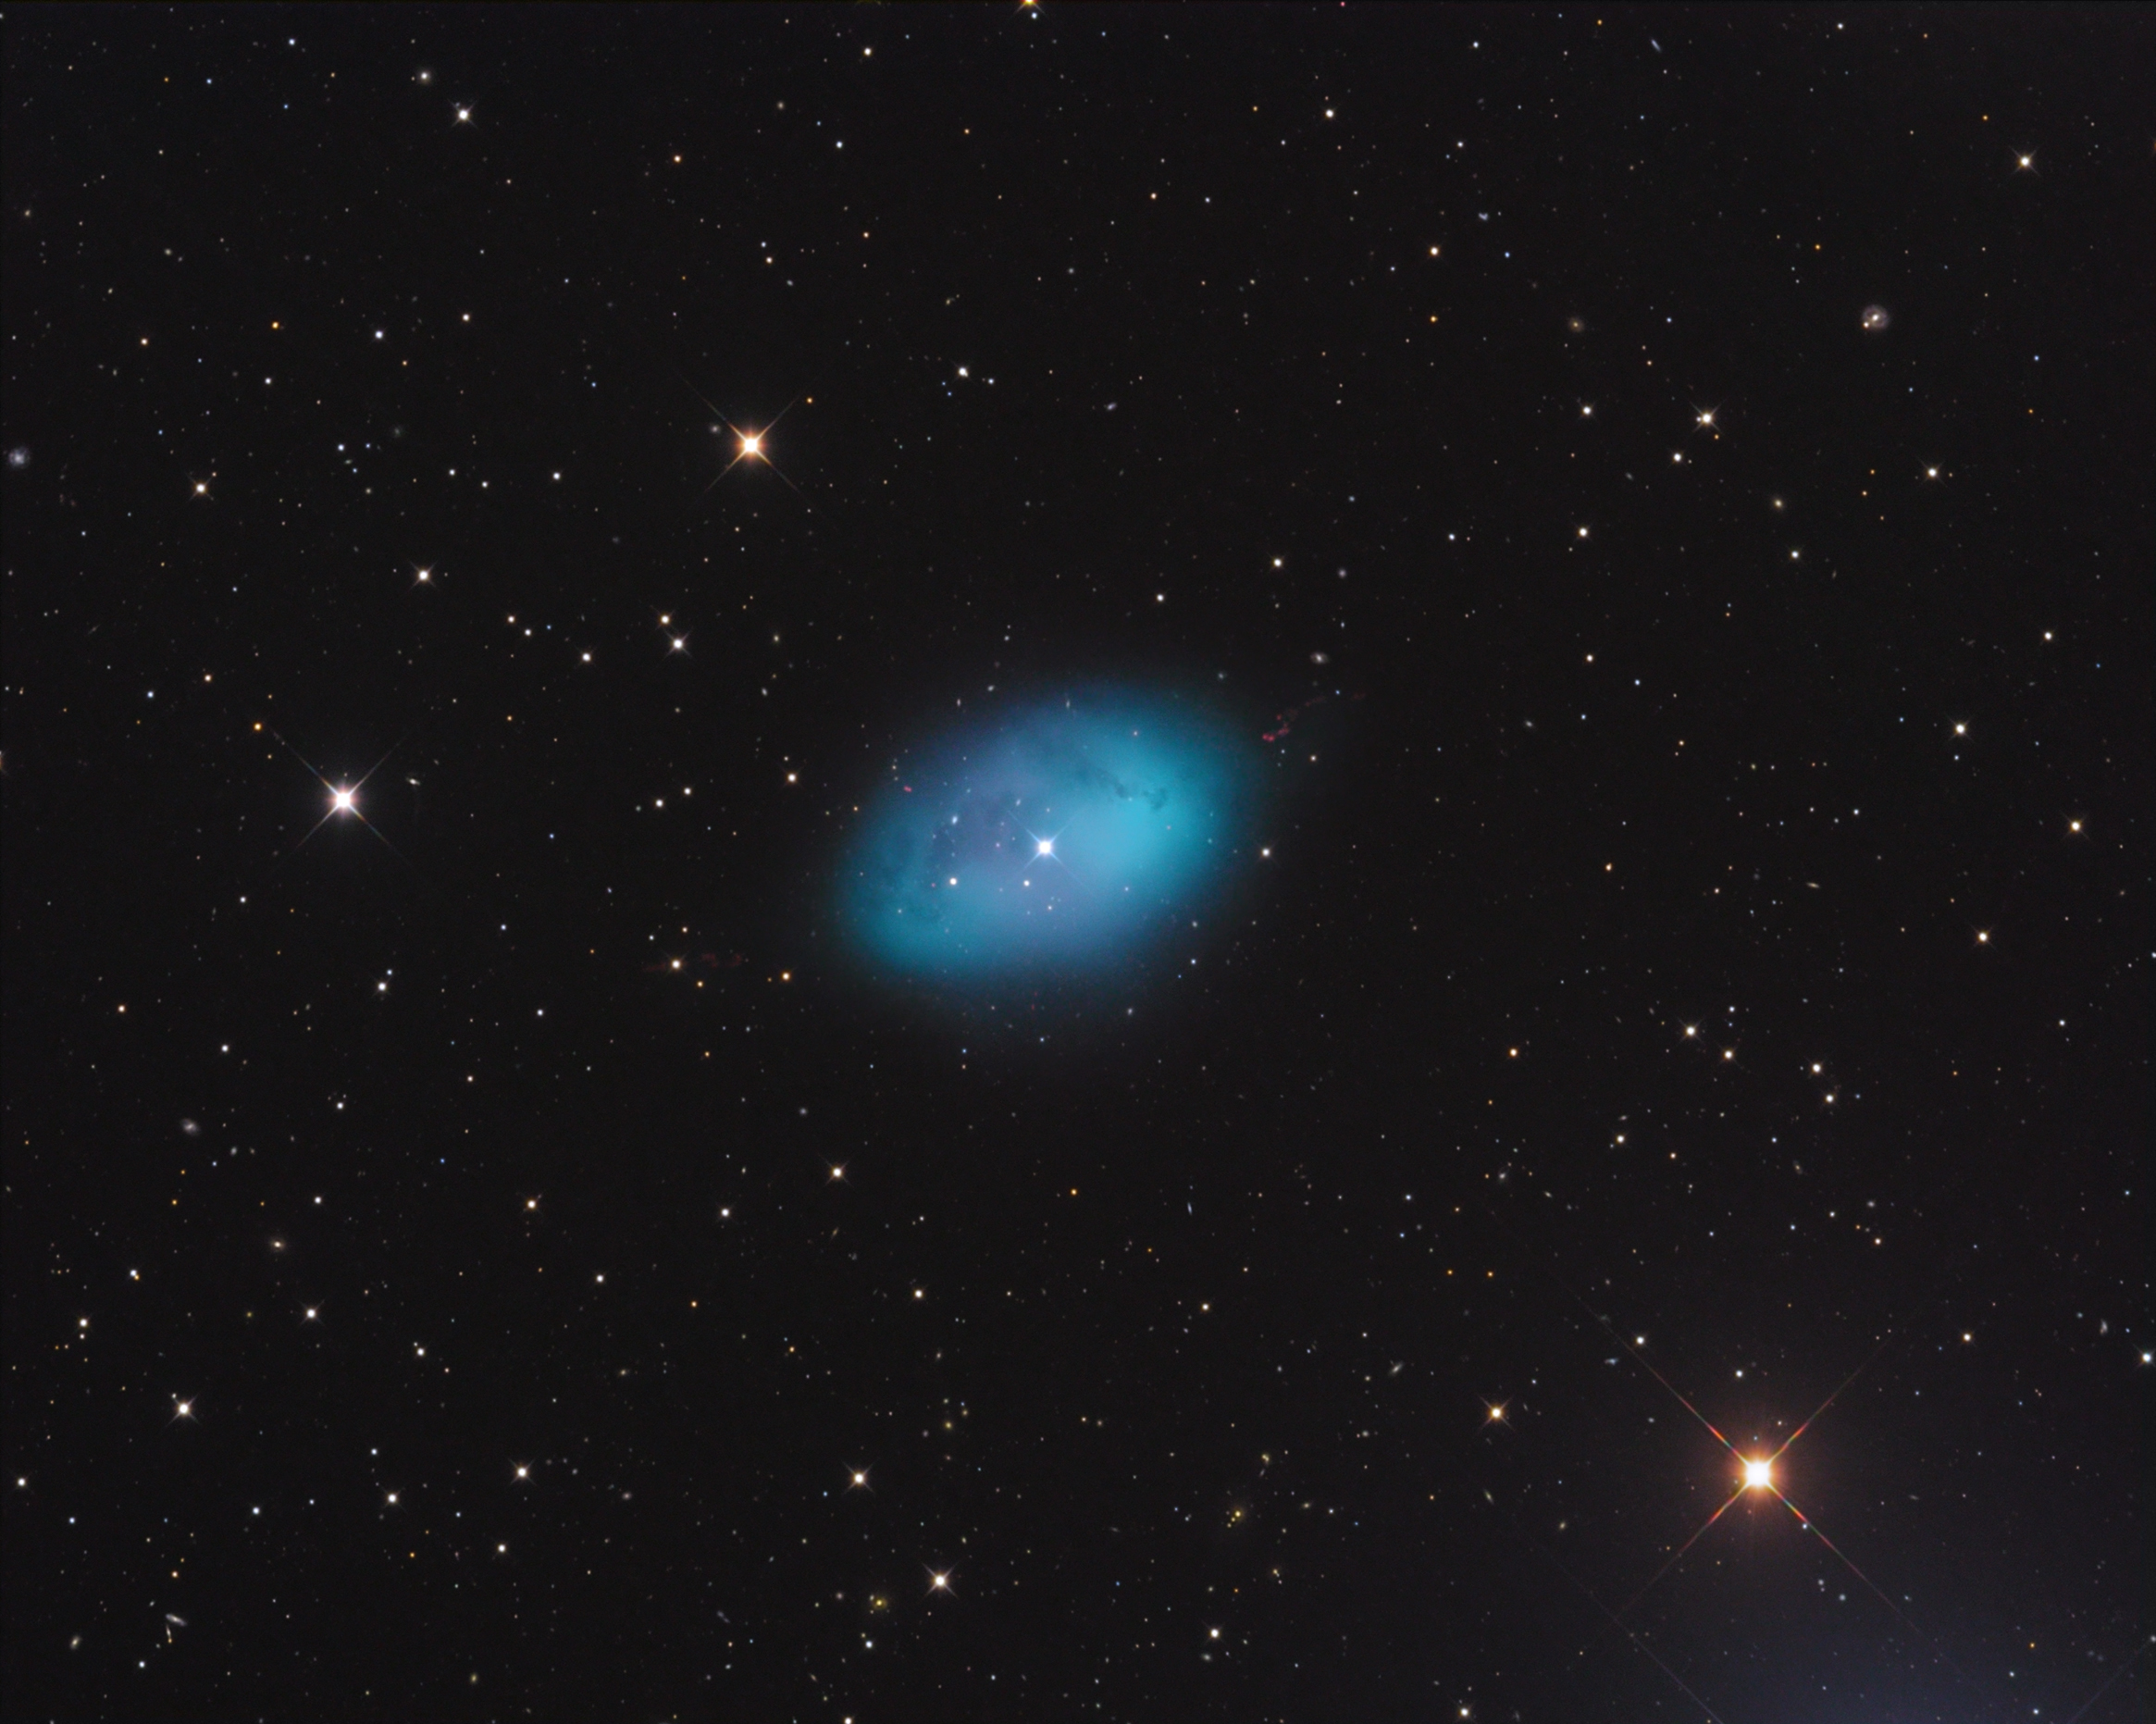 NGC 1360 The Magic Egg in Fornax